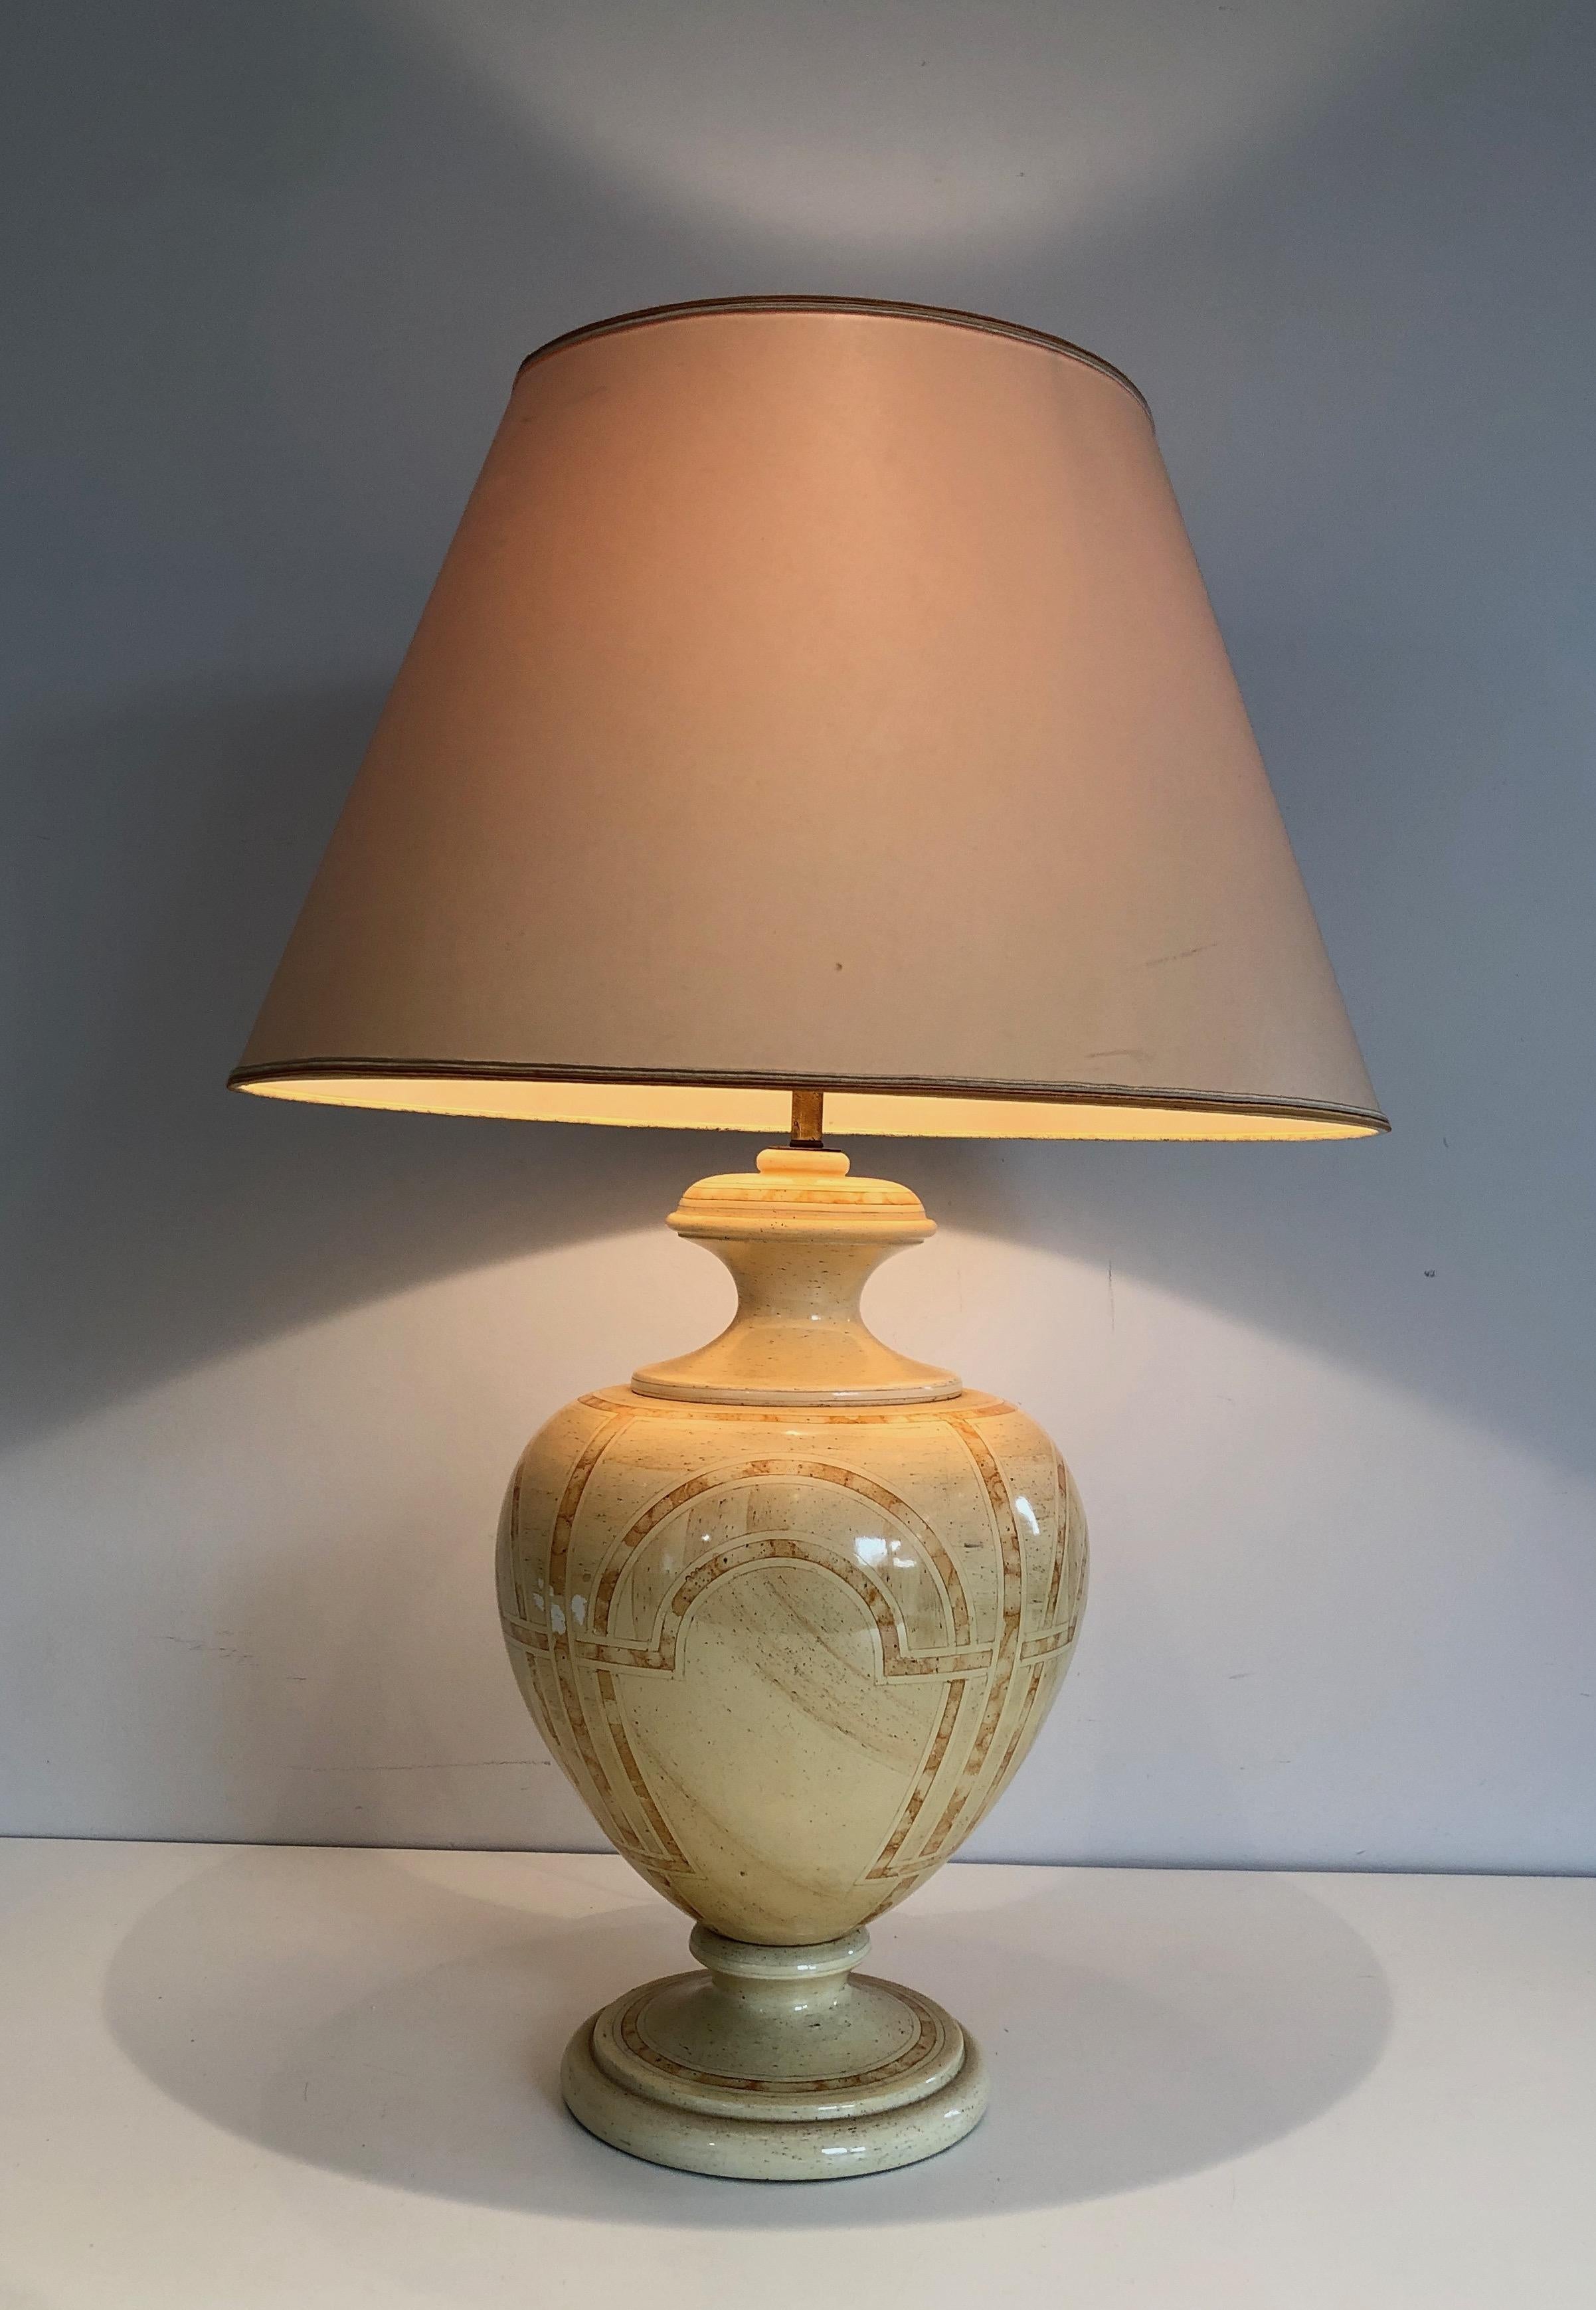 Eggshell Lacquered Table Lamp with Interlacing Decors, French Work, circa 1970 For Sale 13